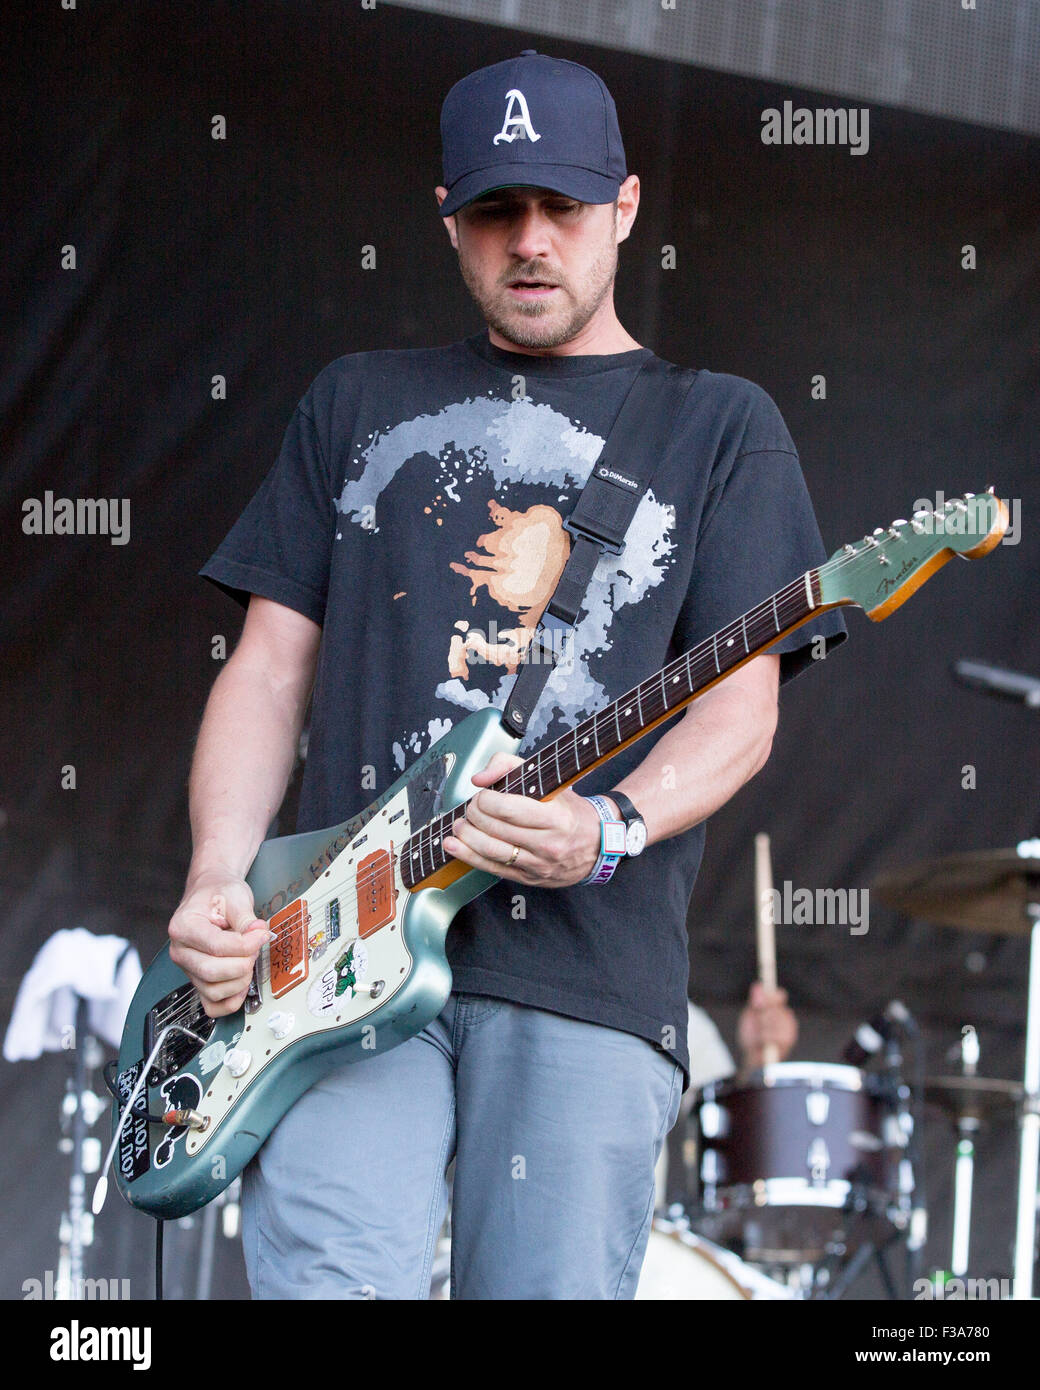 https://c8.alamy.com/comp/F3A780/austin-texas-usa-2nd-oct-2015-singer-and-guitarist-jesse-lacey-of-F3A780.jpg